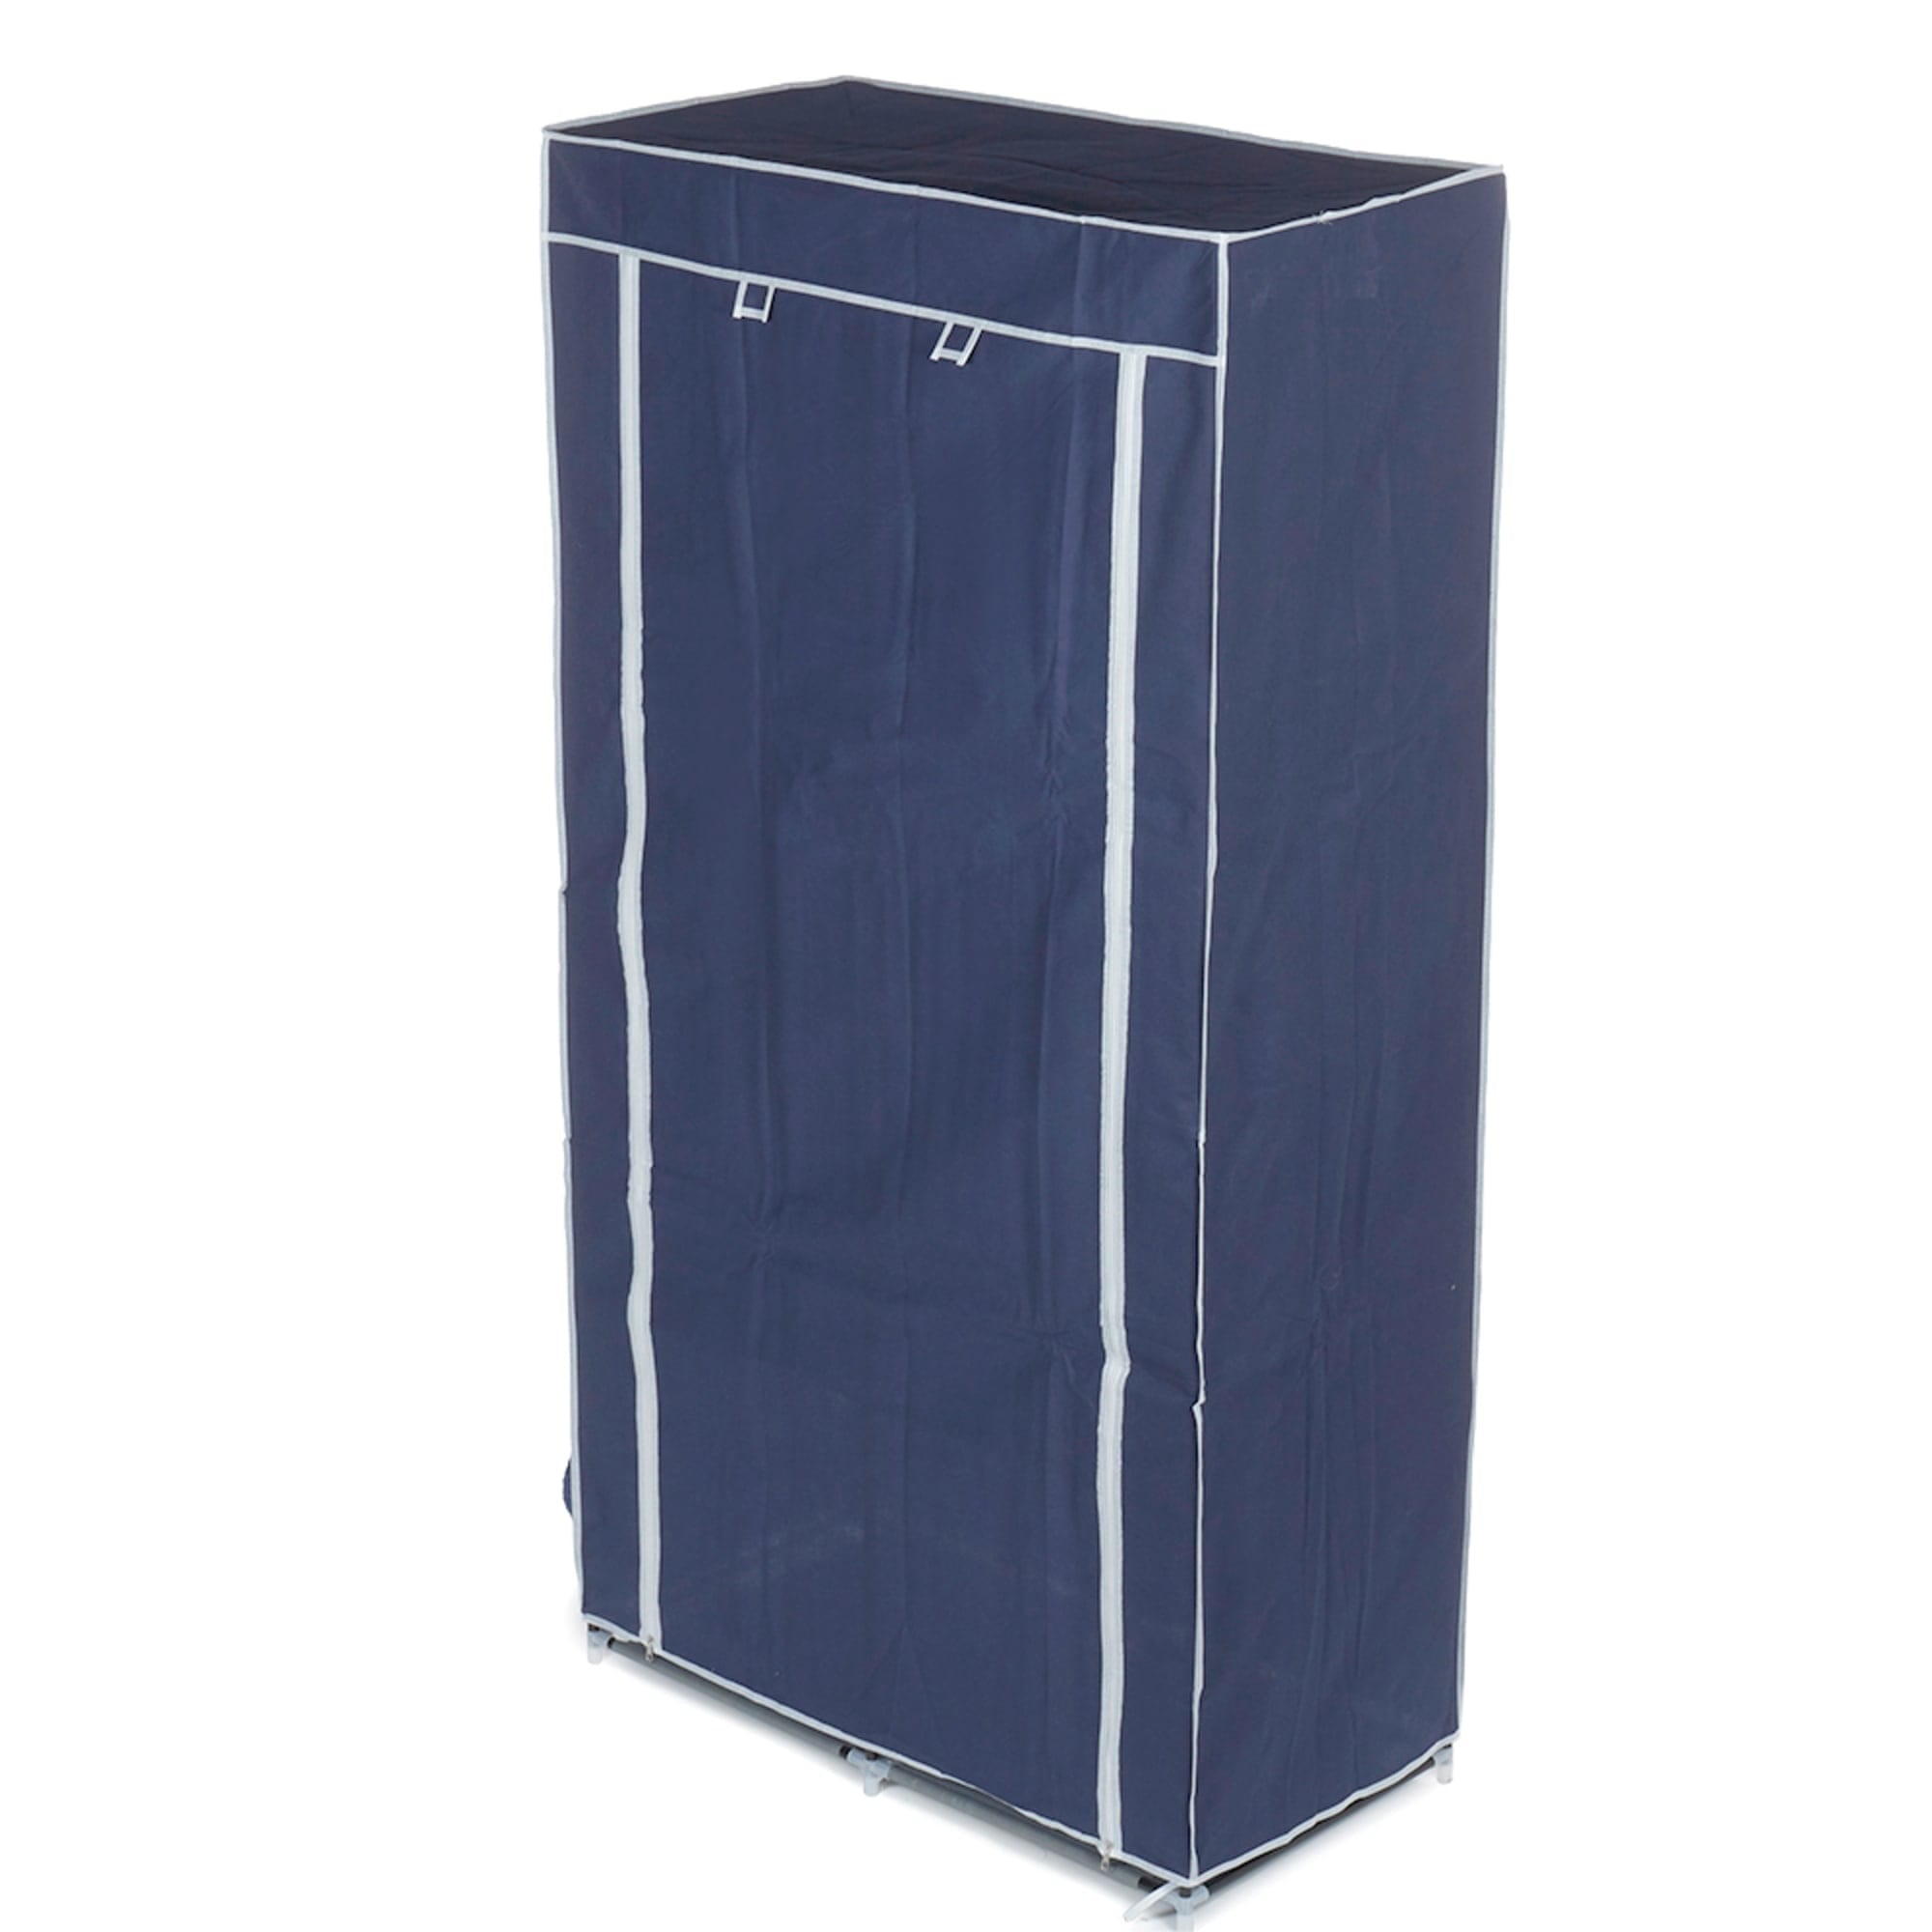 Home Basics Portable Closet with Shelving $25.00 EACH, CASE PACK OF 6